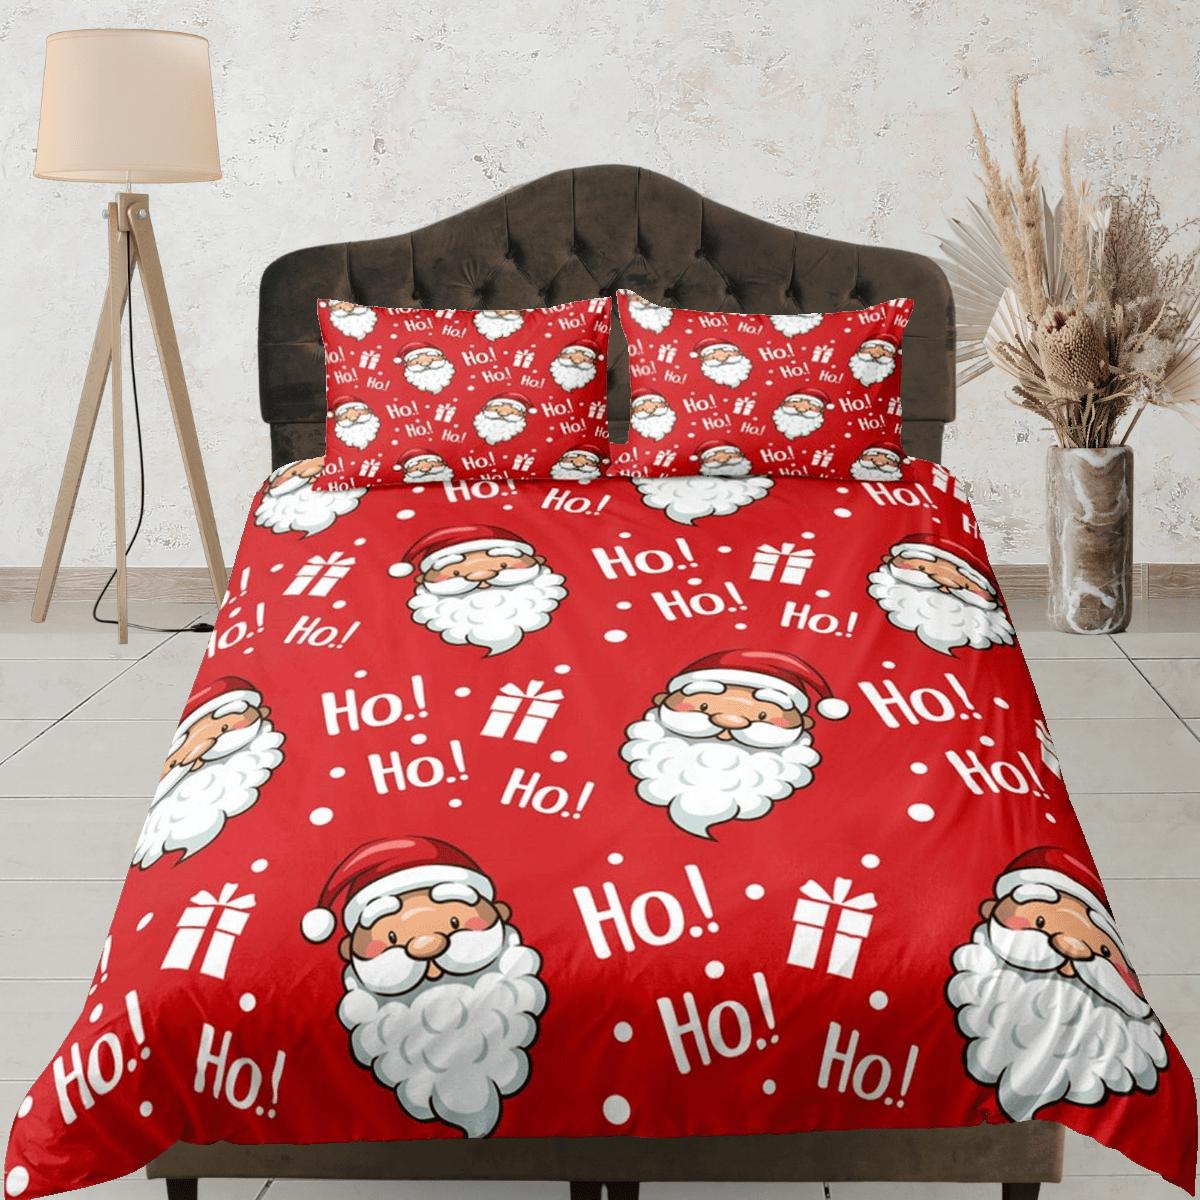 daintyduvet Santa Claus Laugh Christmas bedding & pillowcase holiday gift red duvet cover king queen full twin toddler bedding baby Christmas farmhouse